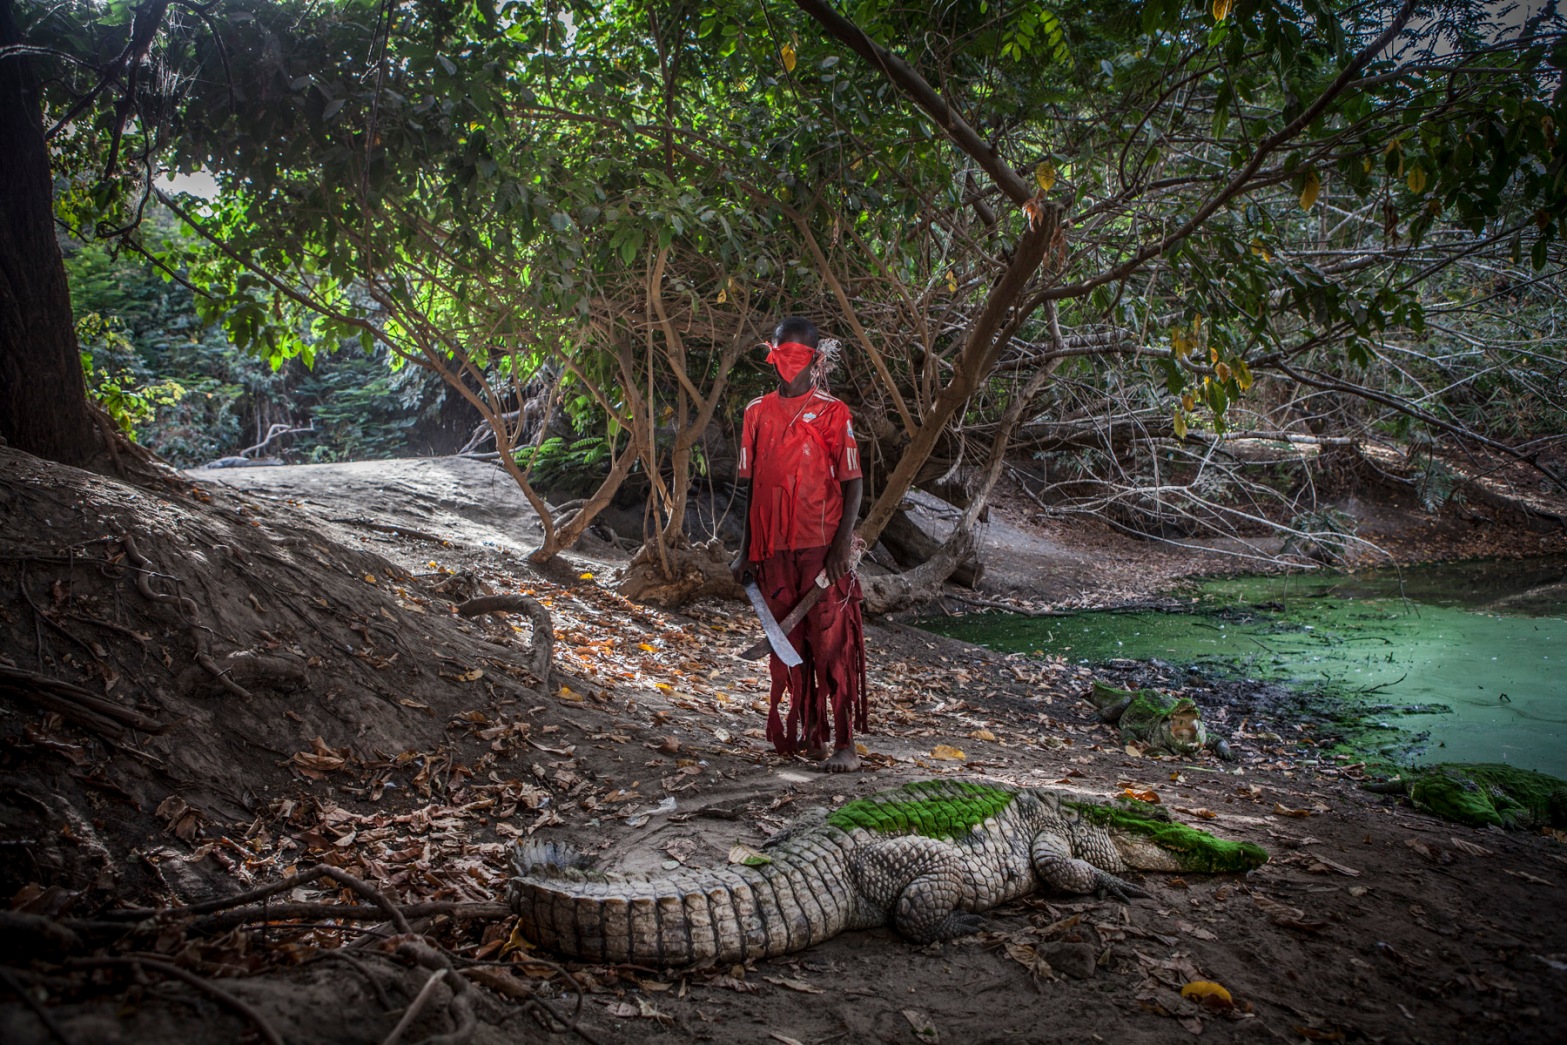 Photography prints - a young boy, wearing a mask and holding a machete, stands in front of a live crocodile, The Gambia, West Africa. Image ©Jason Florio